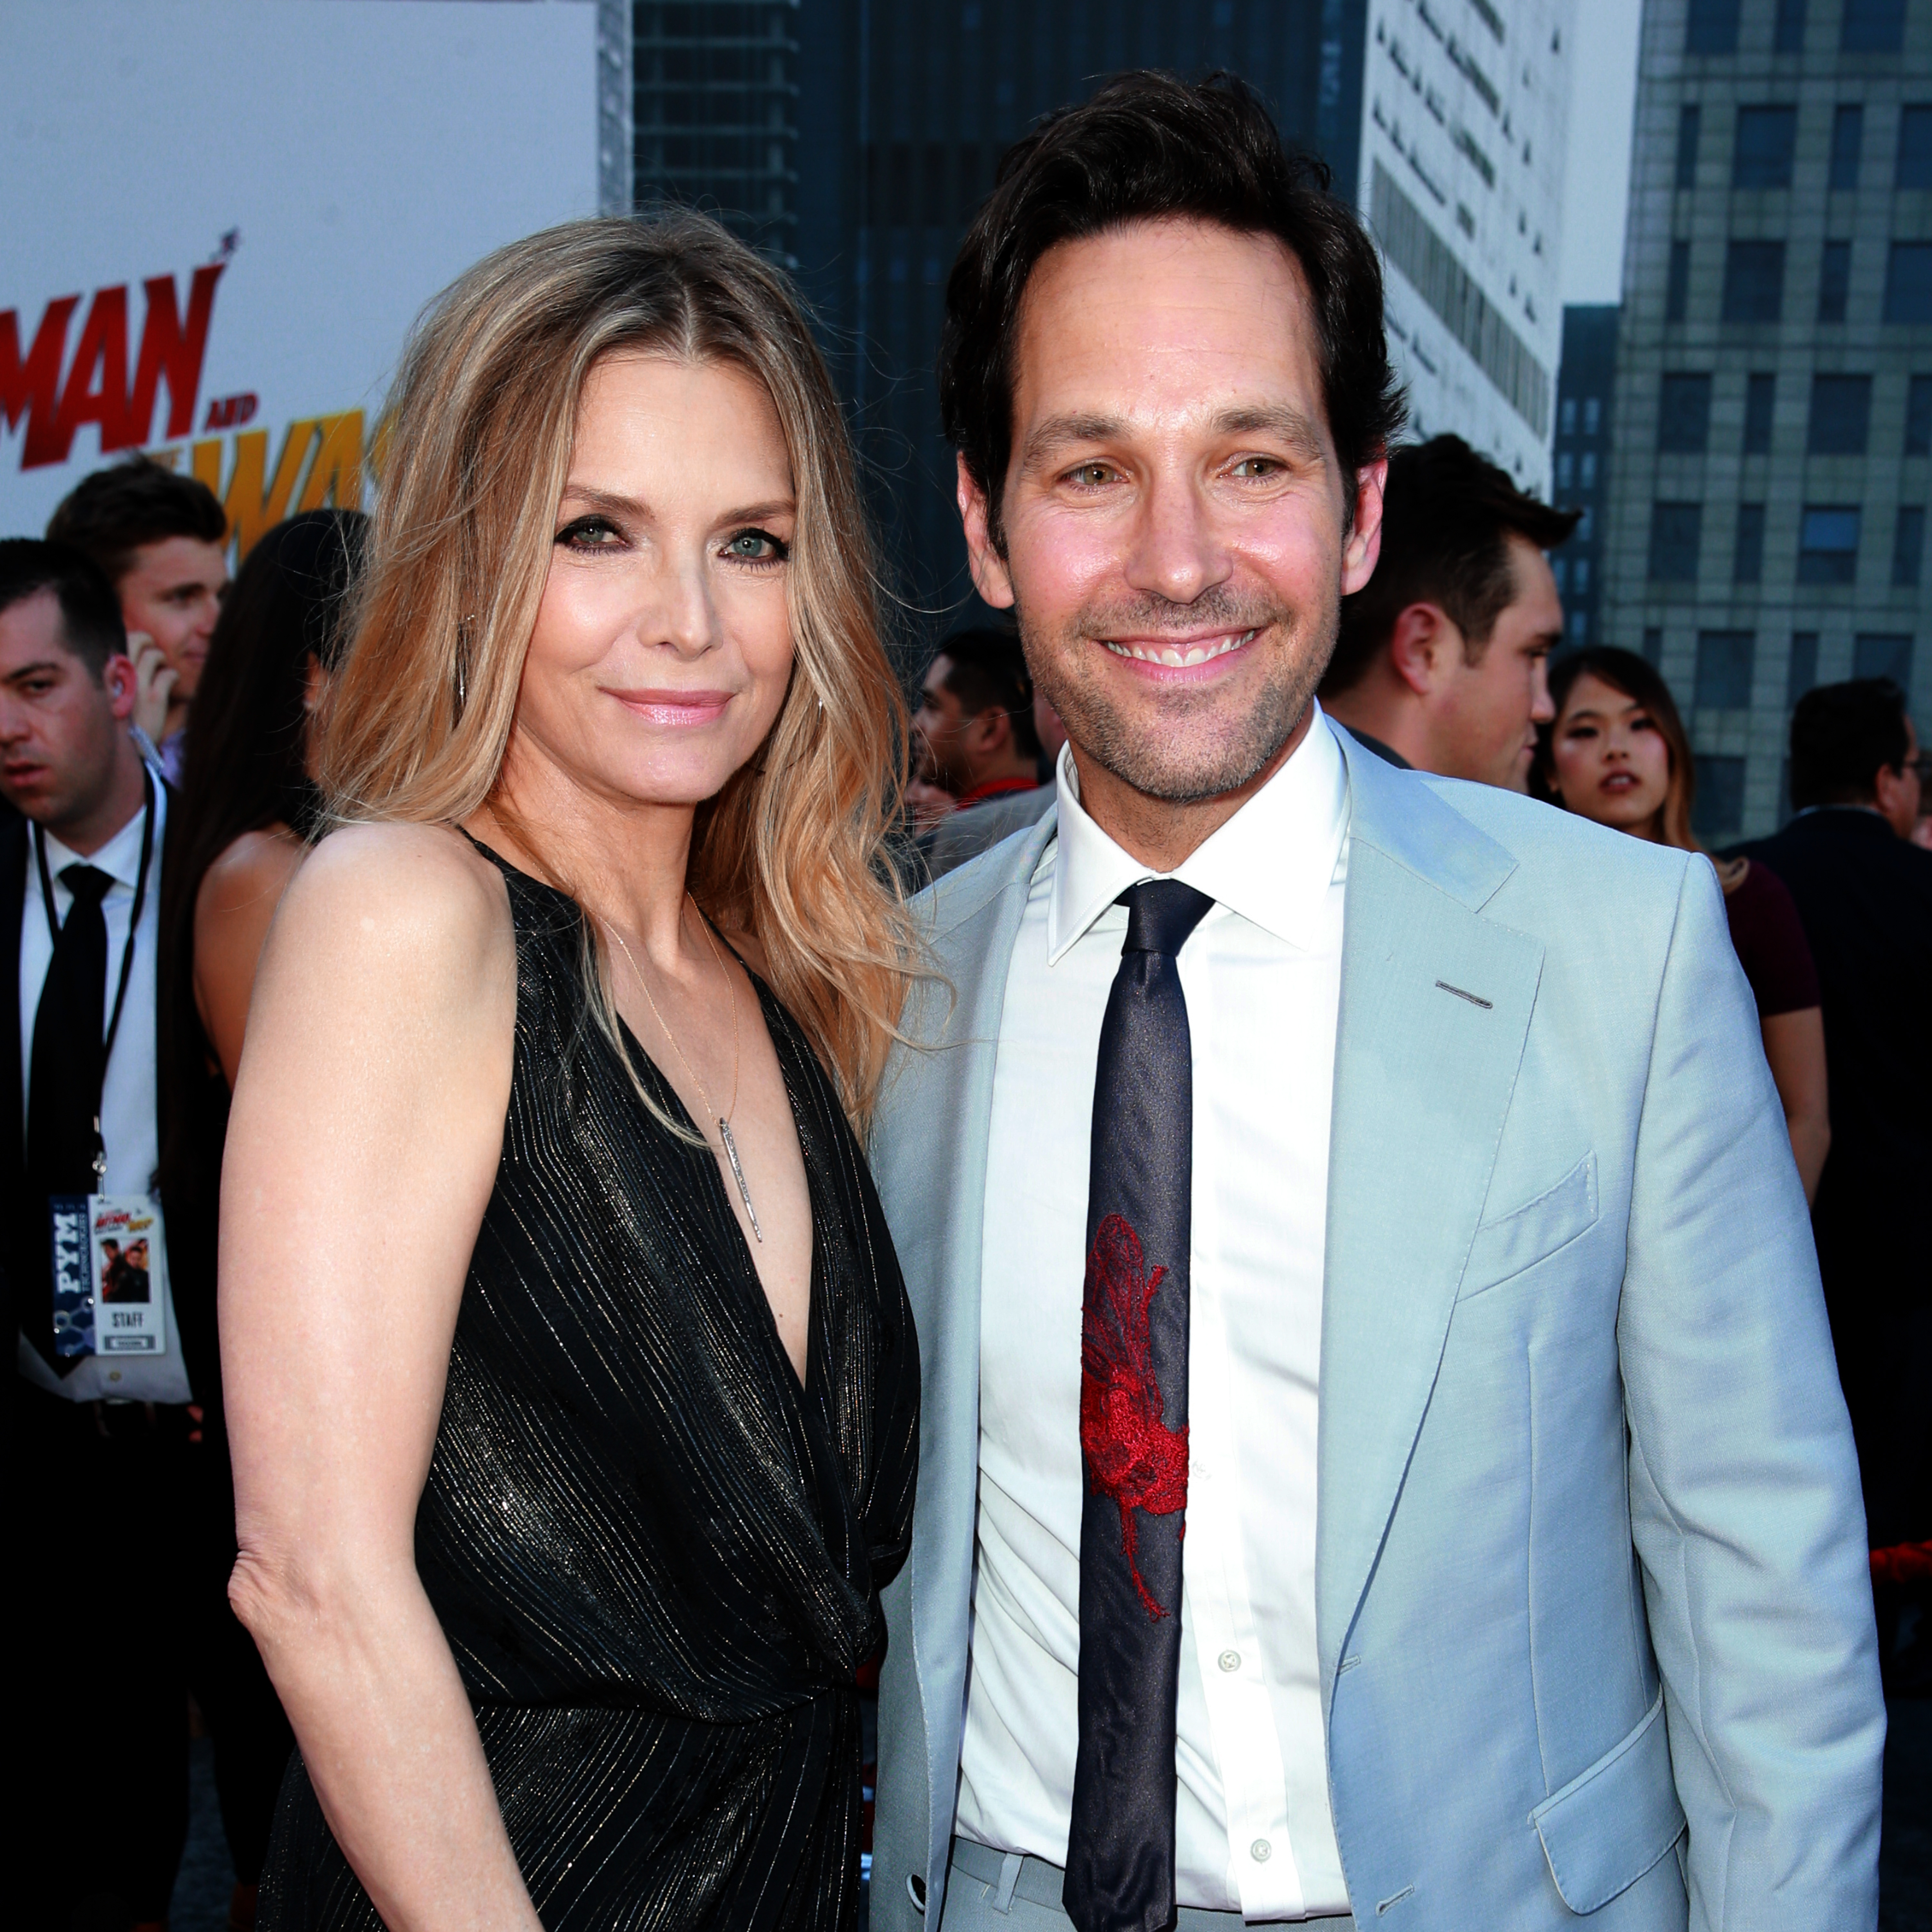 Michelle Pfeiffer and Paul Rudd at the "Ant-Man And The Wasp" premiere in Los Angeles, California, on June 25, 2018. | Source: Getty Images